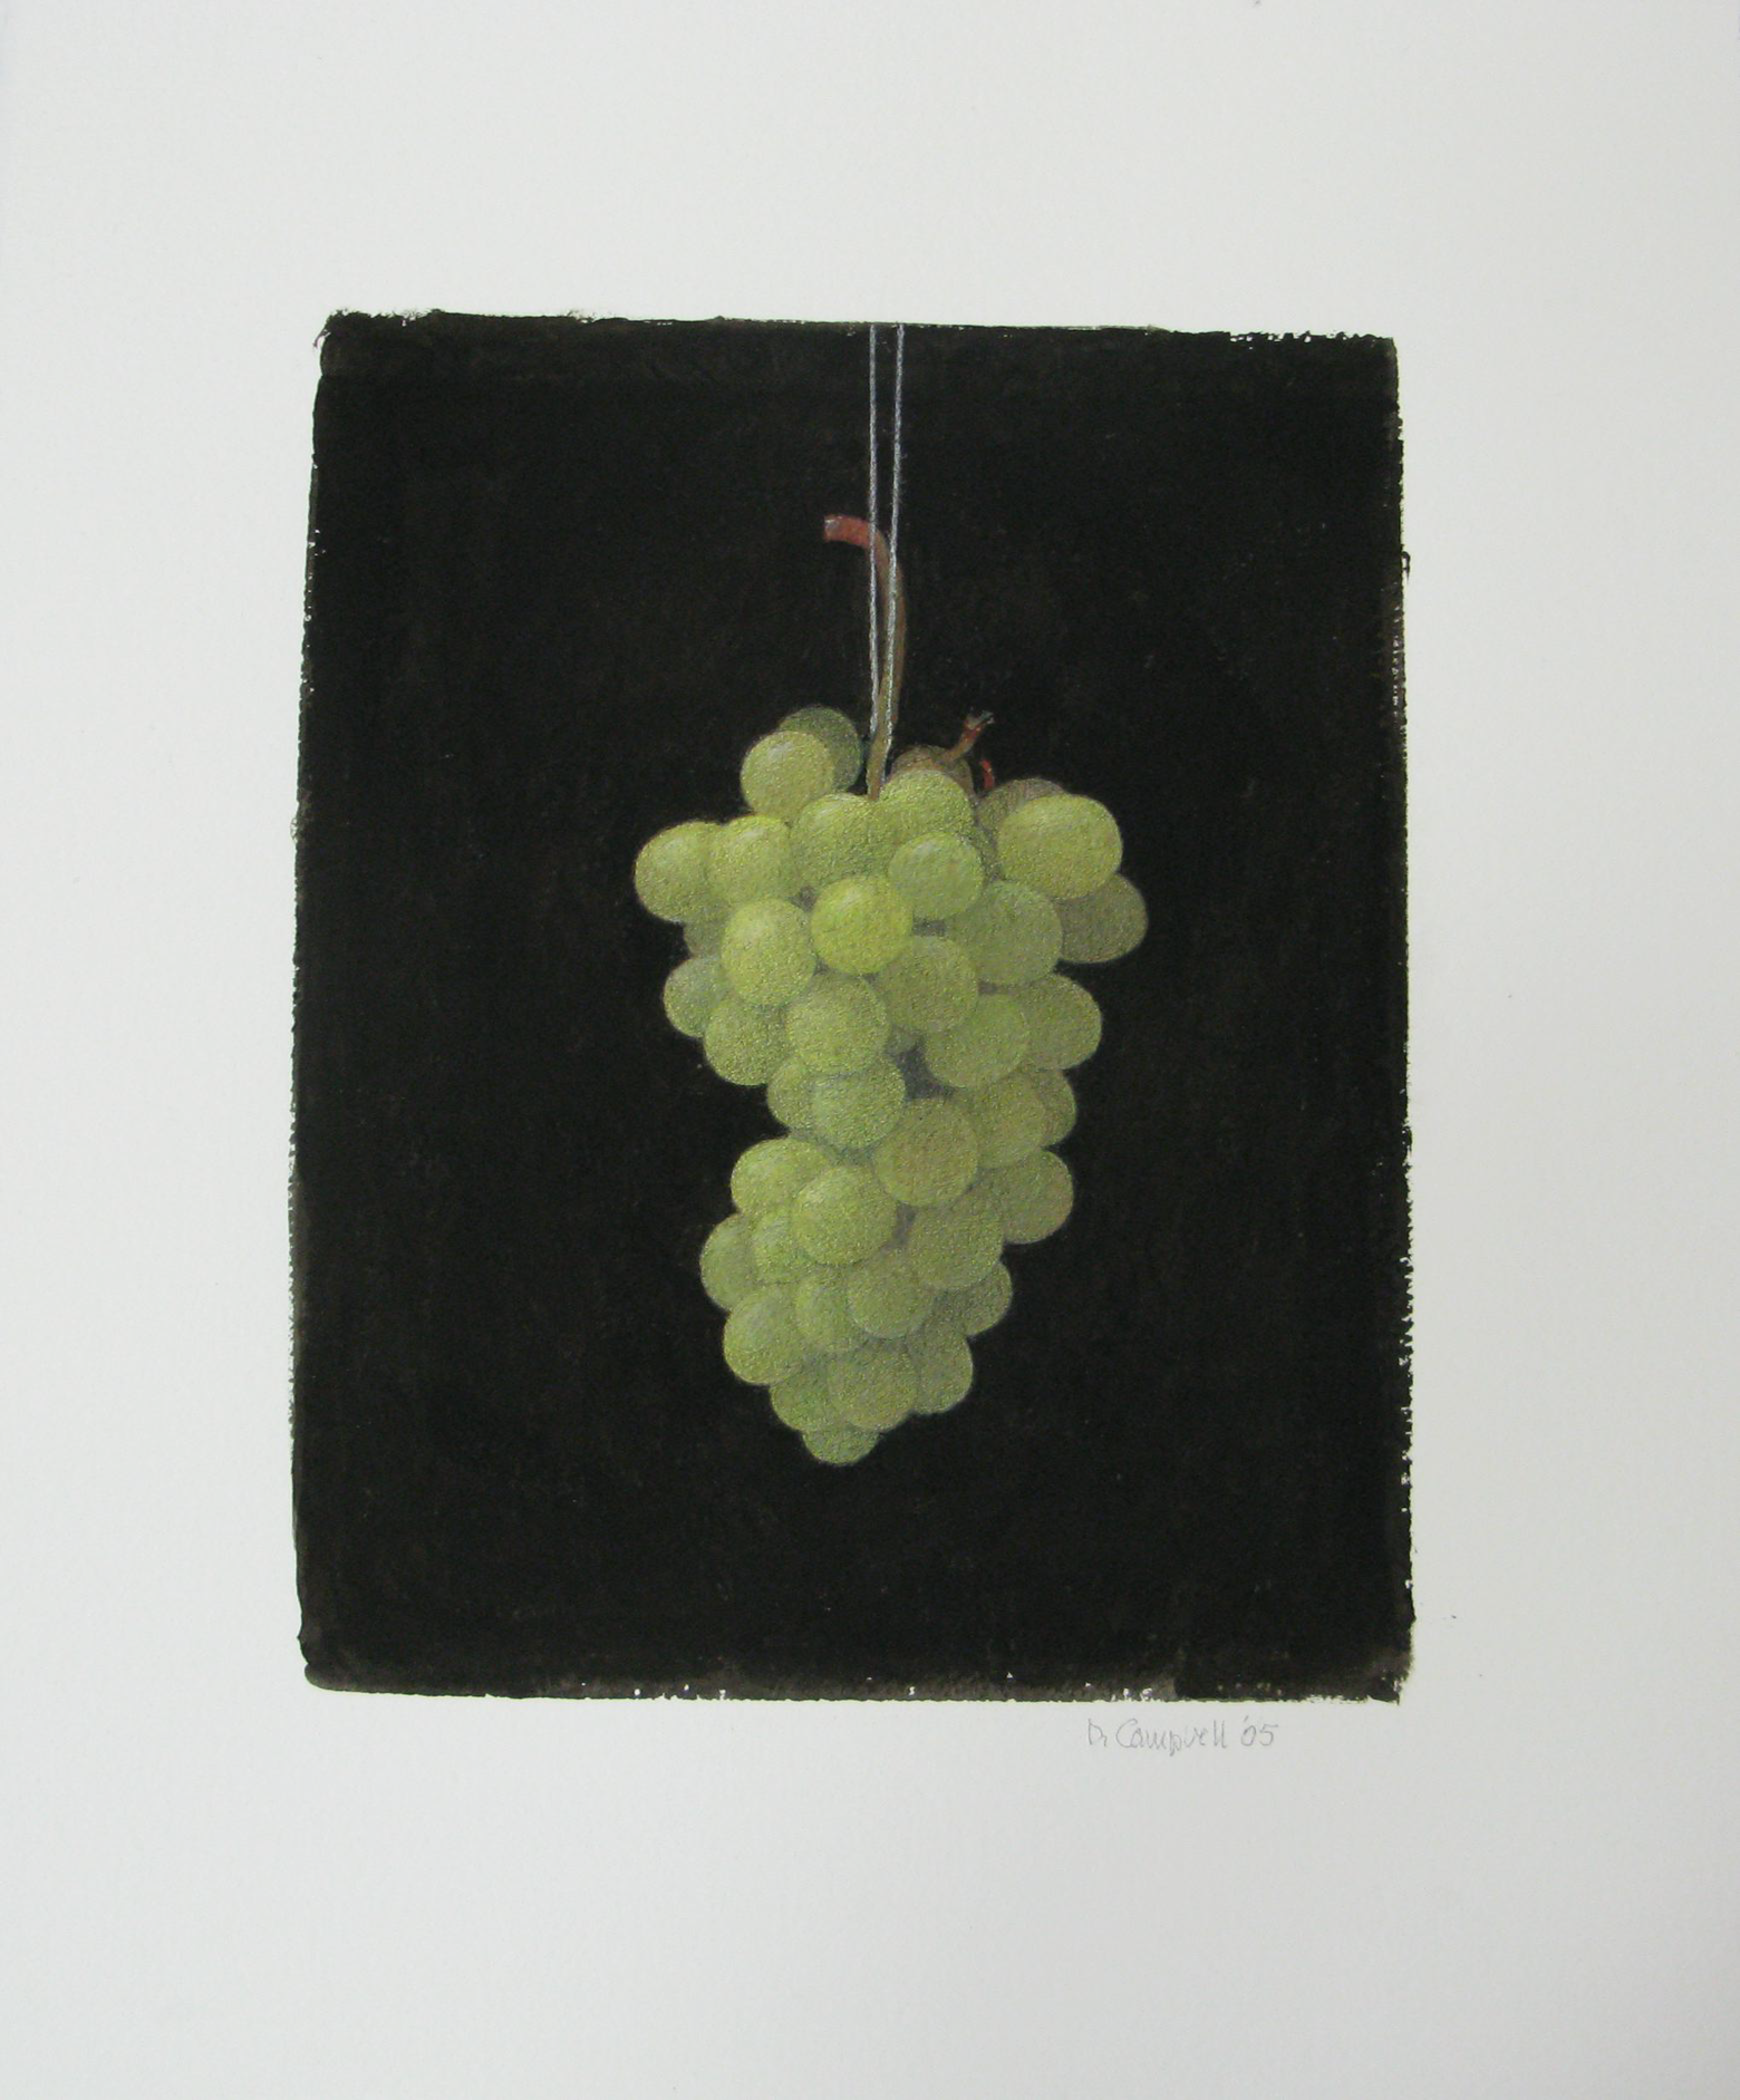 Untitled (Suspended Grapes) by Donald Campbell